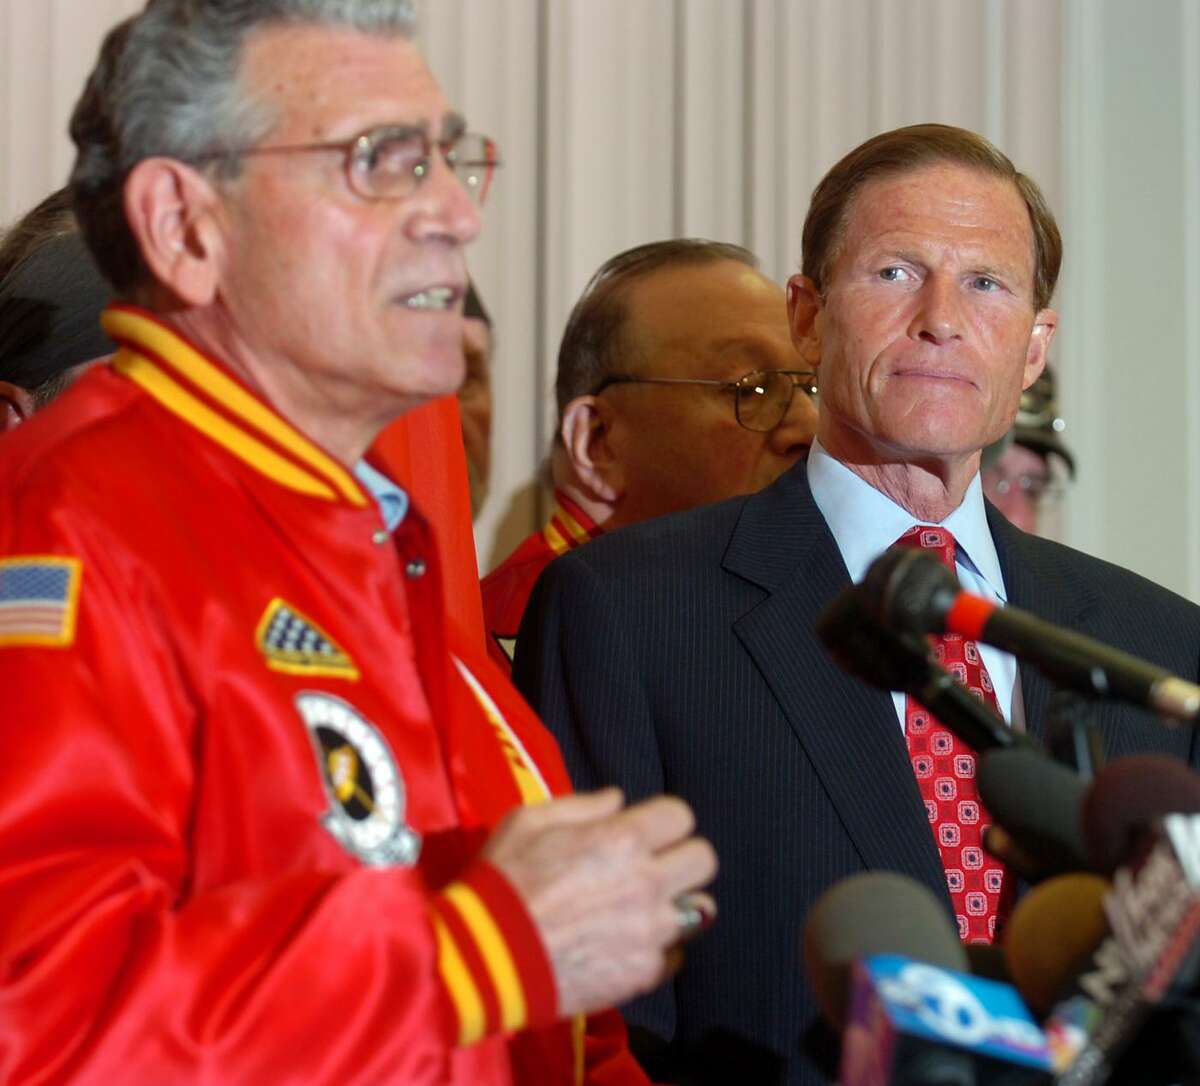 Attorney General Richard Blumenthal listens as Peter Galgano, of East Berlin, a member of the Marine Corps League, speaks at the Hannon-Hatch VFW, in West Hartford, Conn. Tuesday, May 18th, 2010. Blumenthal held a news conference to address a New York Times article that accused him of misstating his Vietnam War service, yet failed to mention his six years in the reserves.